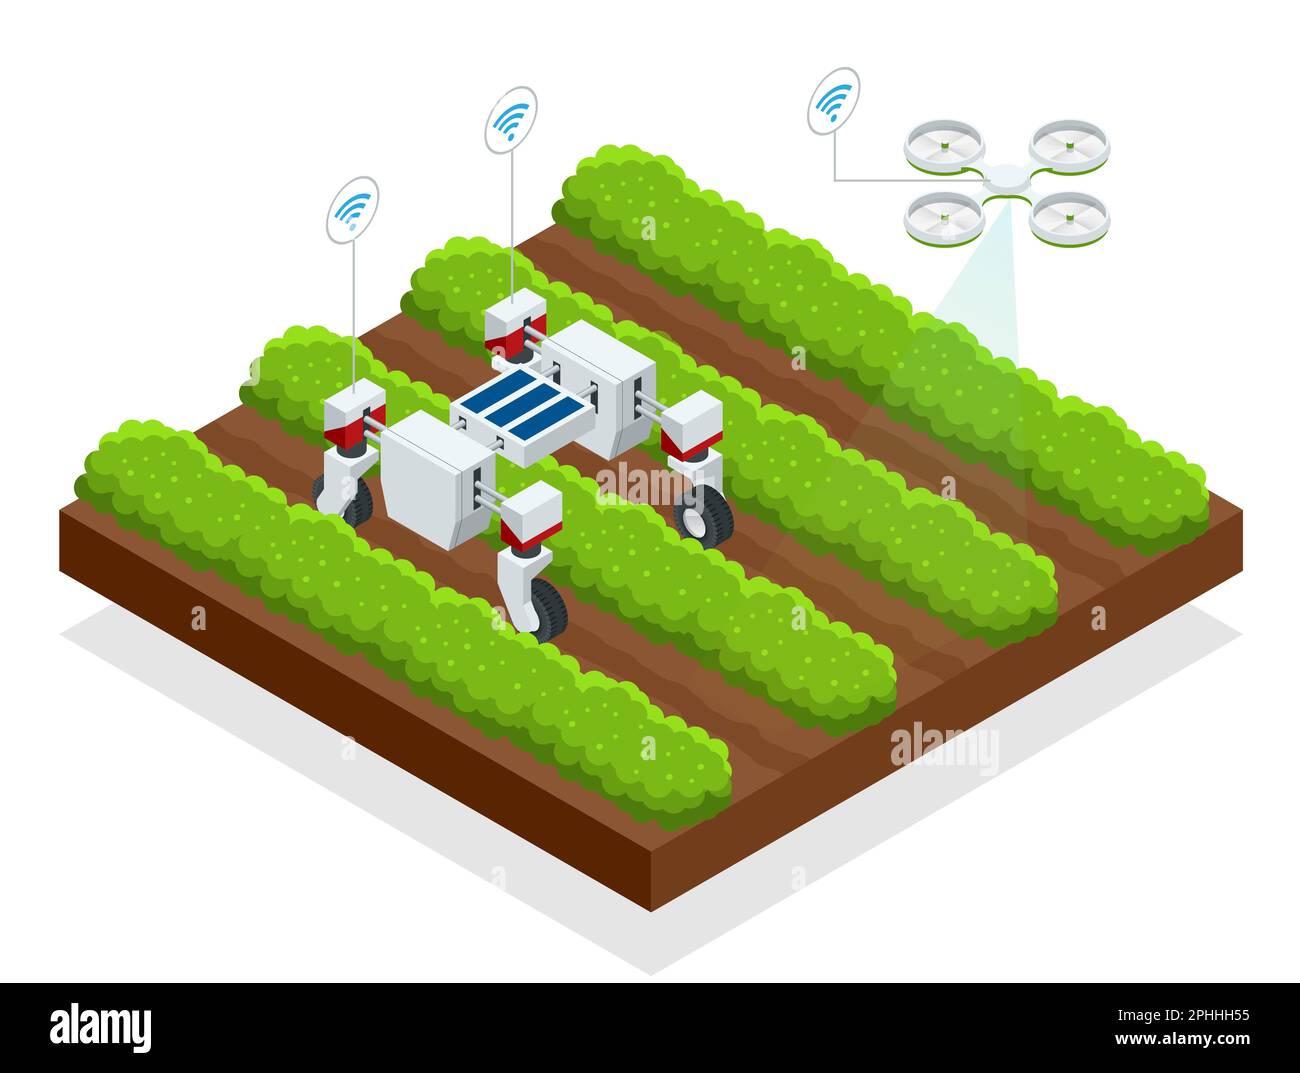 Isometric automatic controlled robots harvest berries. Smart robotic in agriculture, automation robot farmers must be programmed to work. Stock Vector